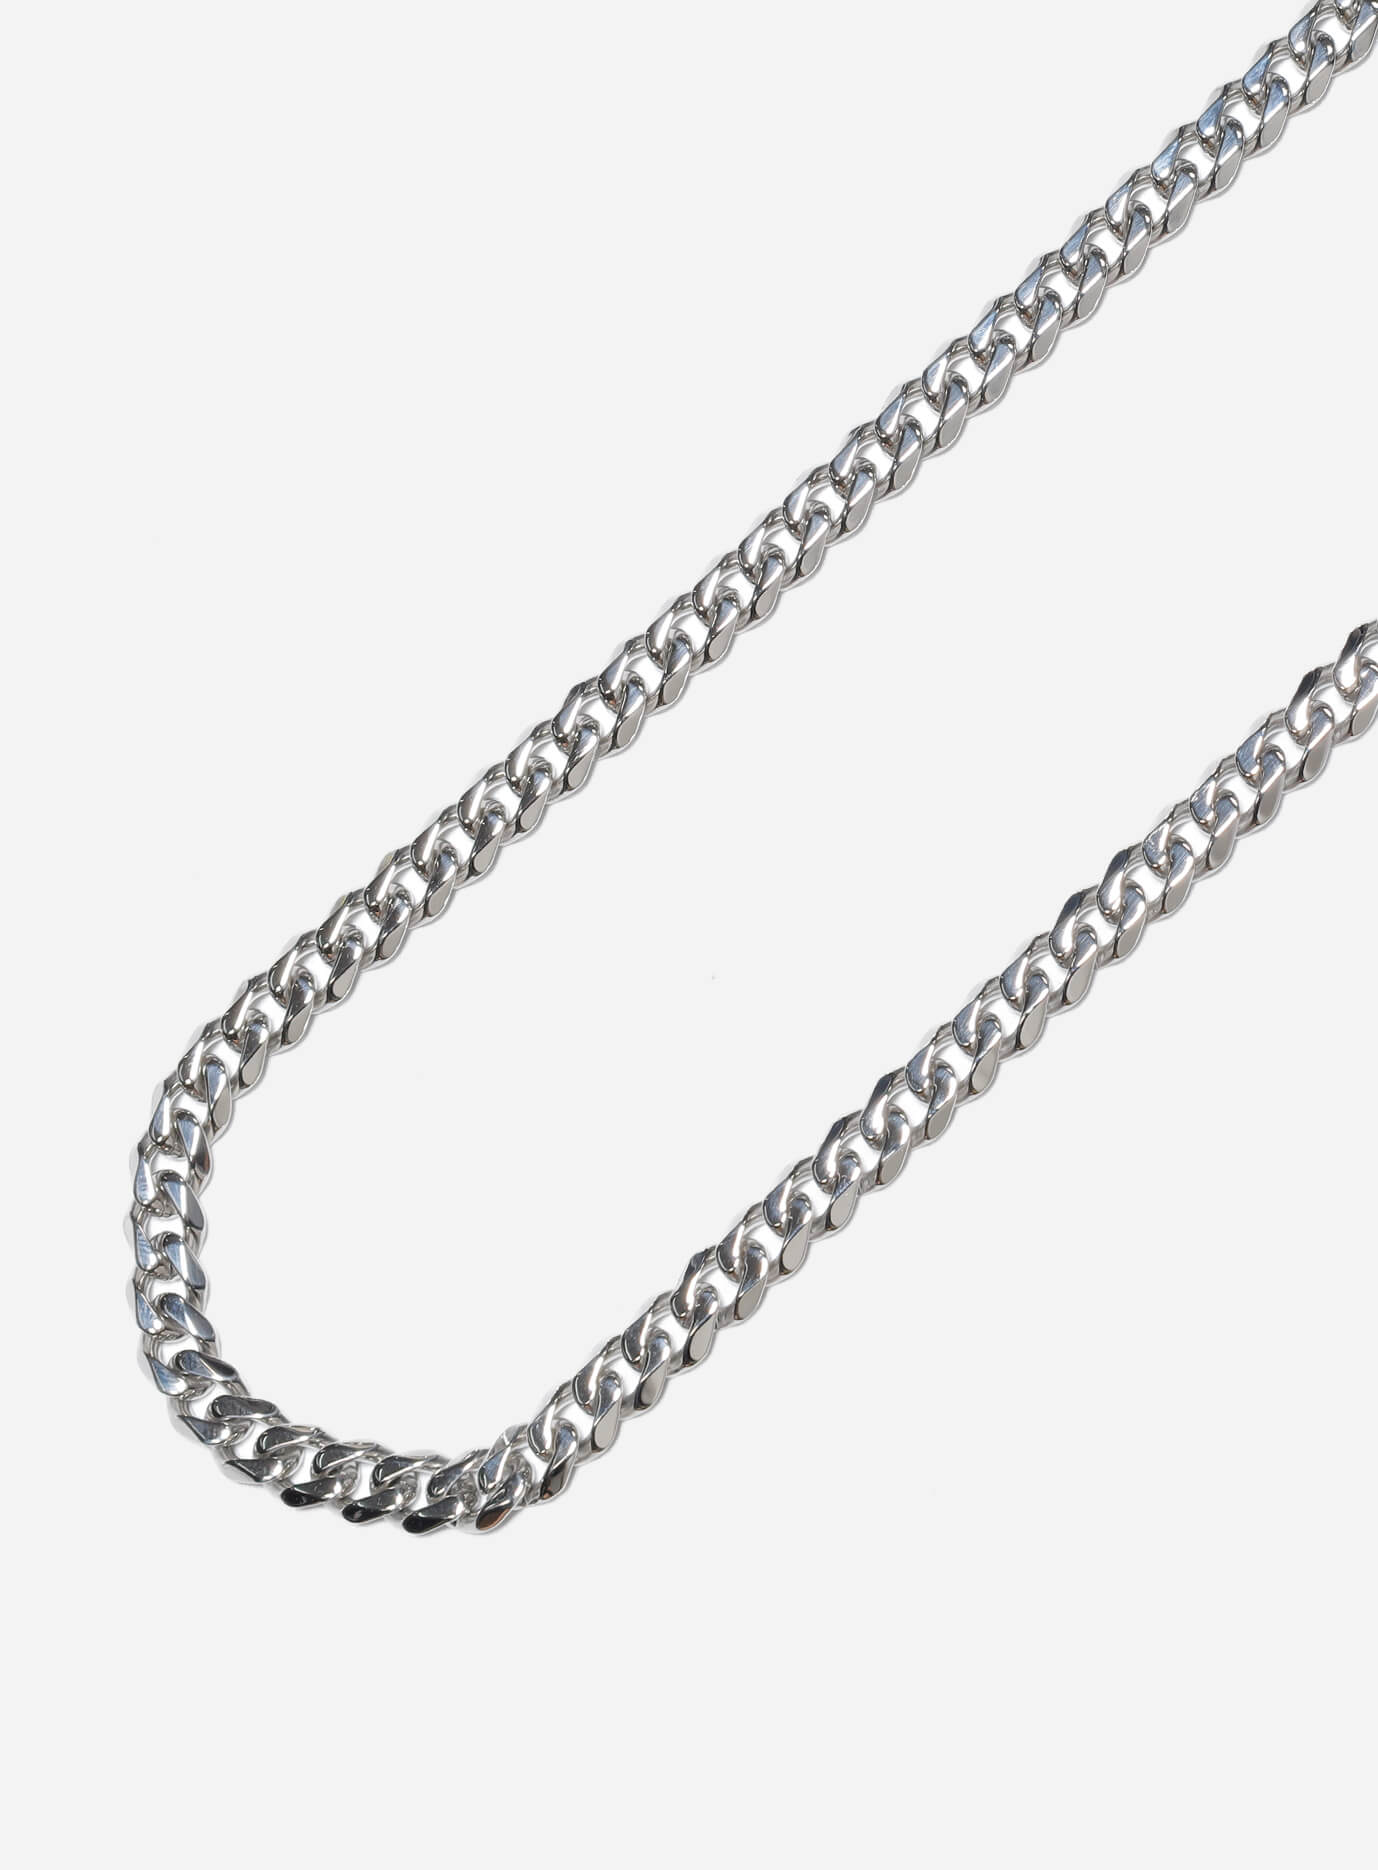 GD Stainless Steel Chain 7mm x 51cm